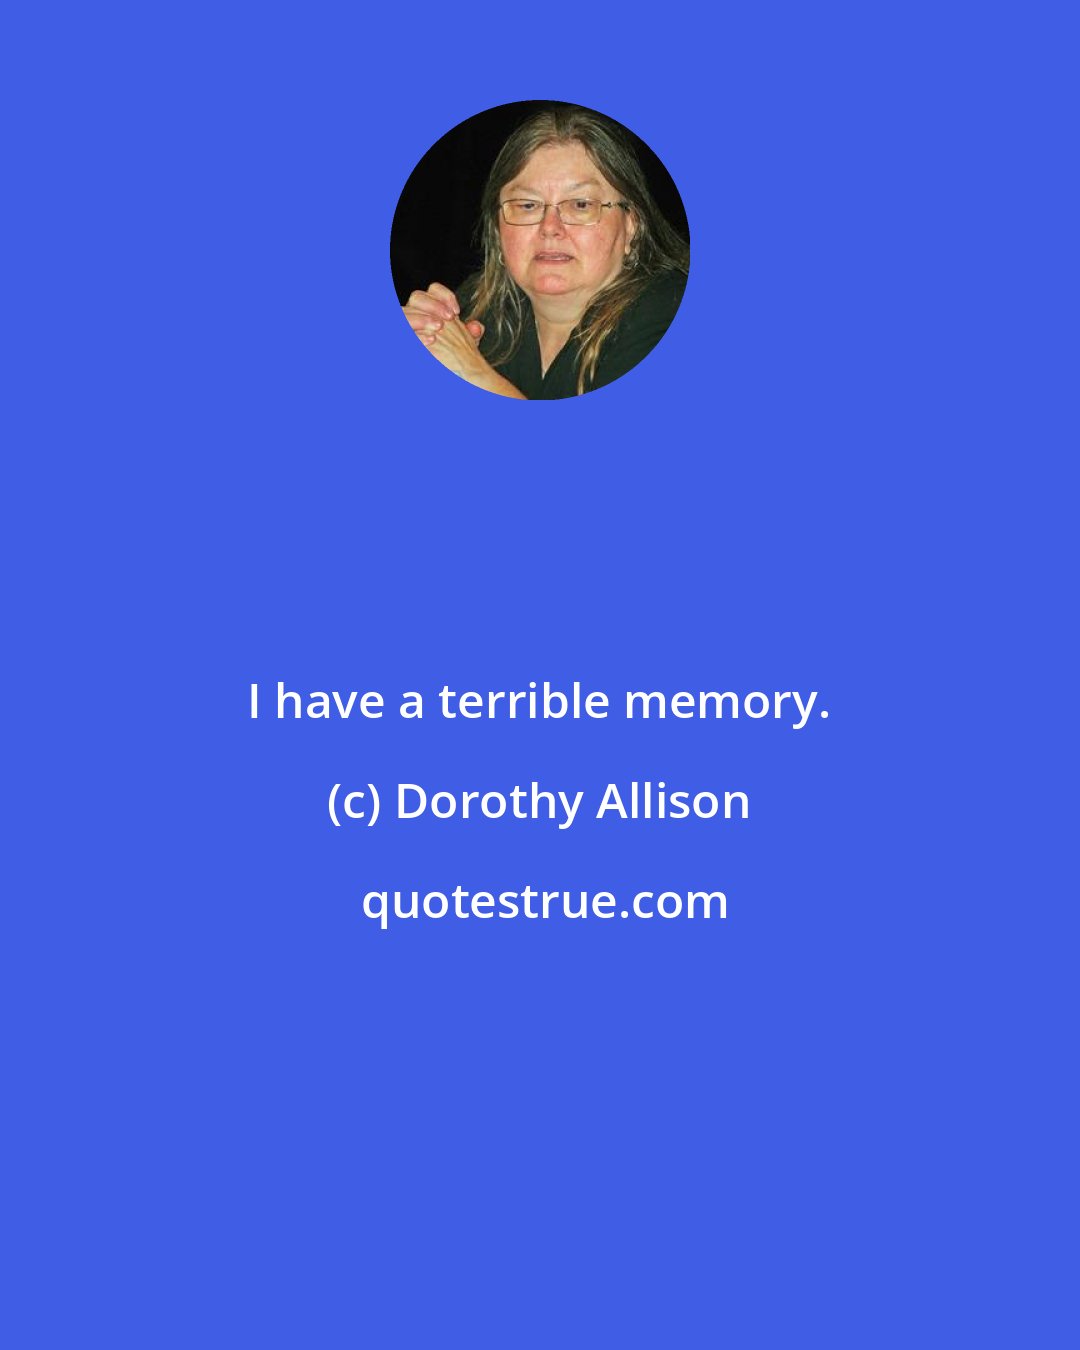 Dorothy Allison: I have a terrible memory.